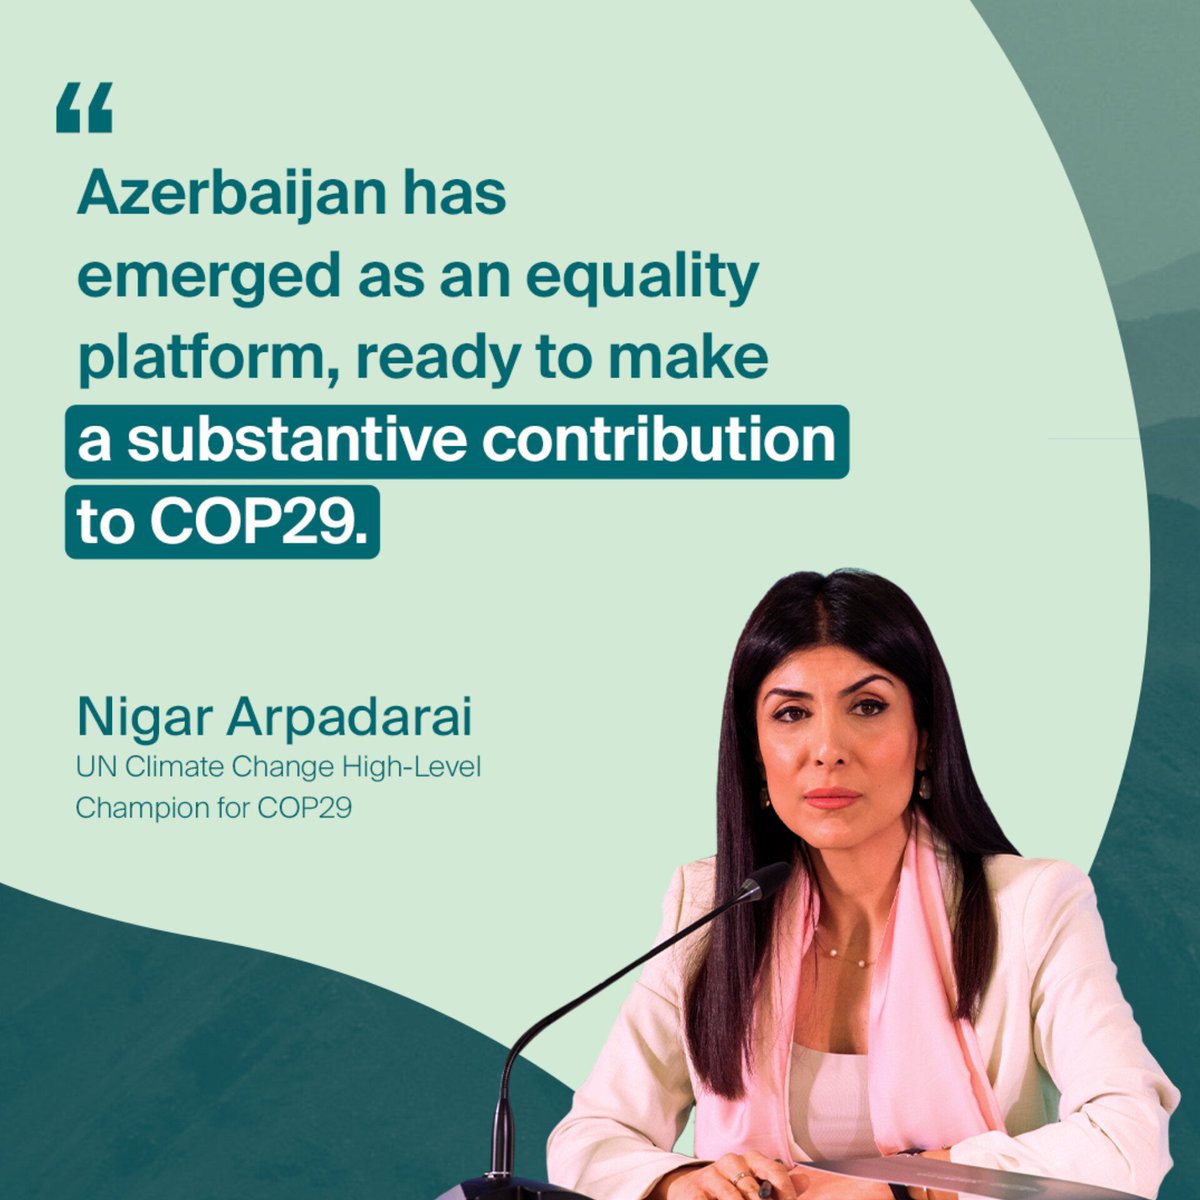 Nigar Arpadarai, UN Climate Change High-Level Champion for #COP29, spoke at the official COP29 press conference about how well-placed Azerbaijan is to significantly contribute to the goals of COP, especially in terms of business engagement.